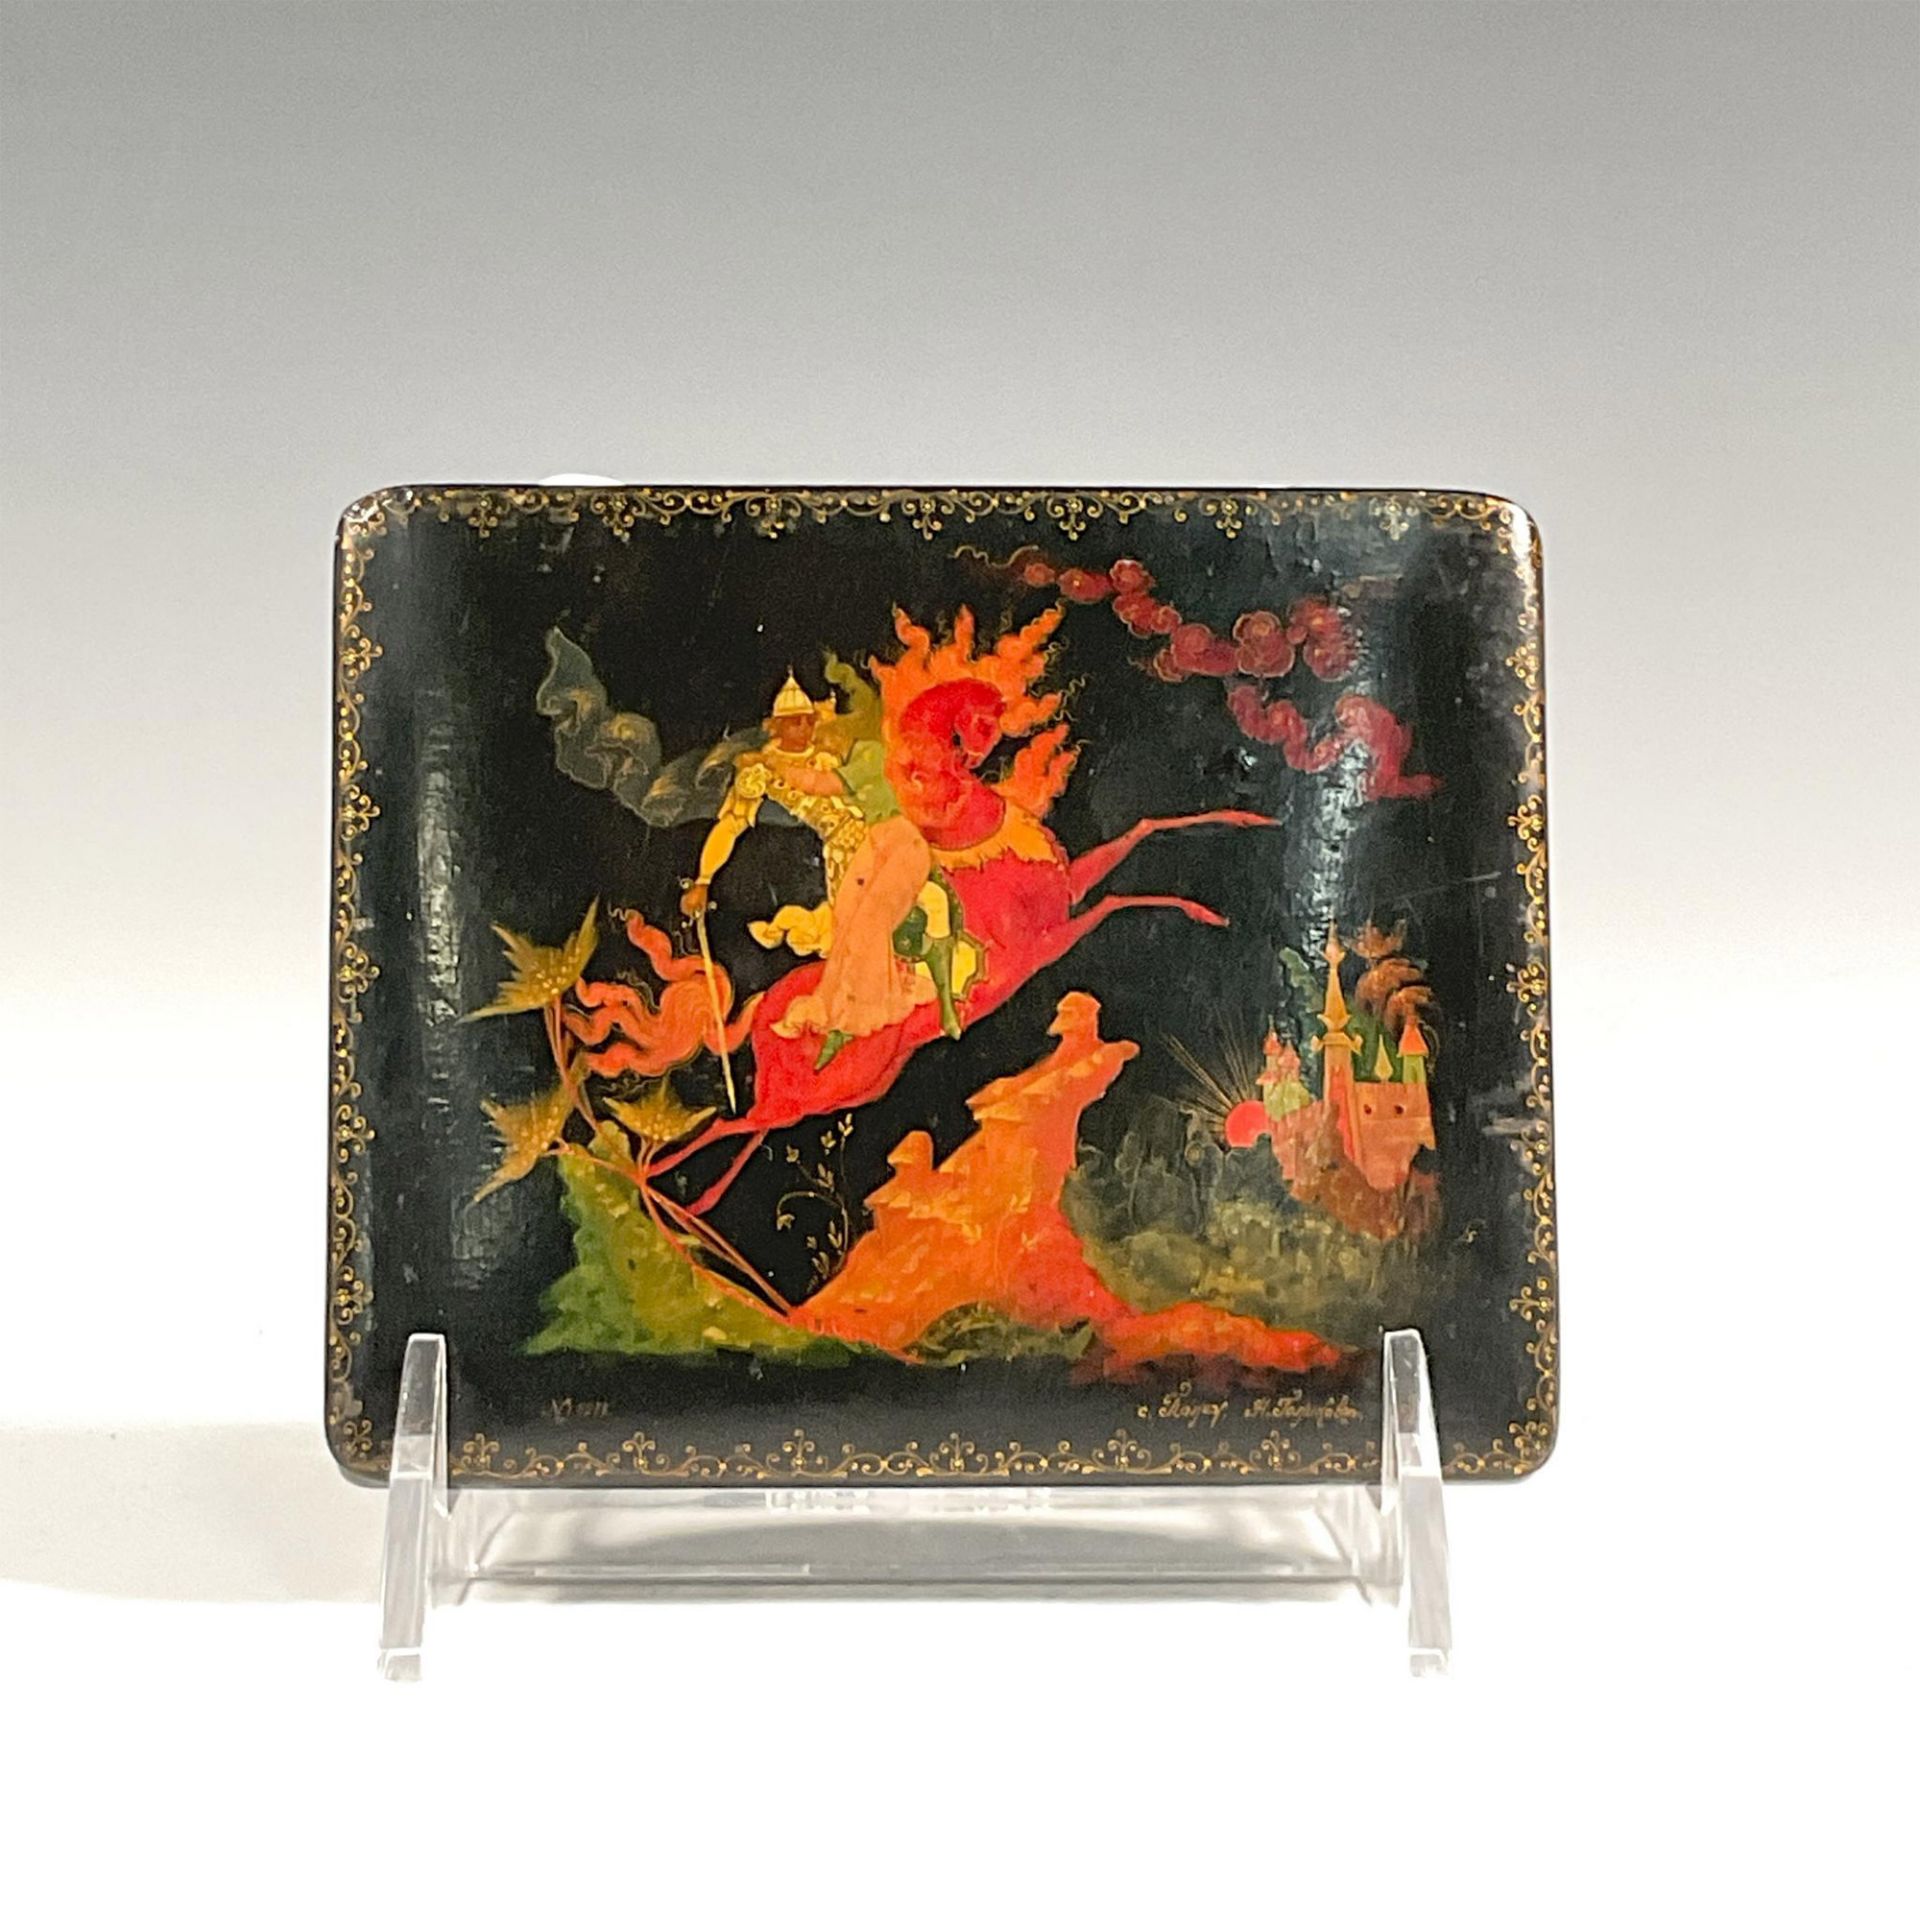 Russian Papier Mache Artist Signed Lacquered Box - Image 3 of 4